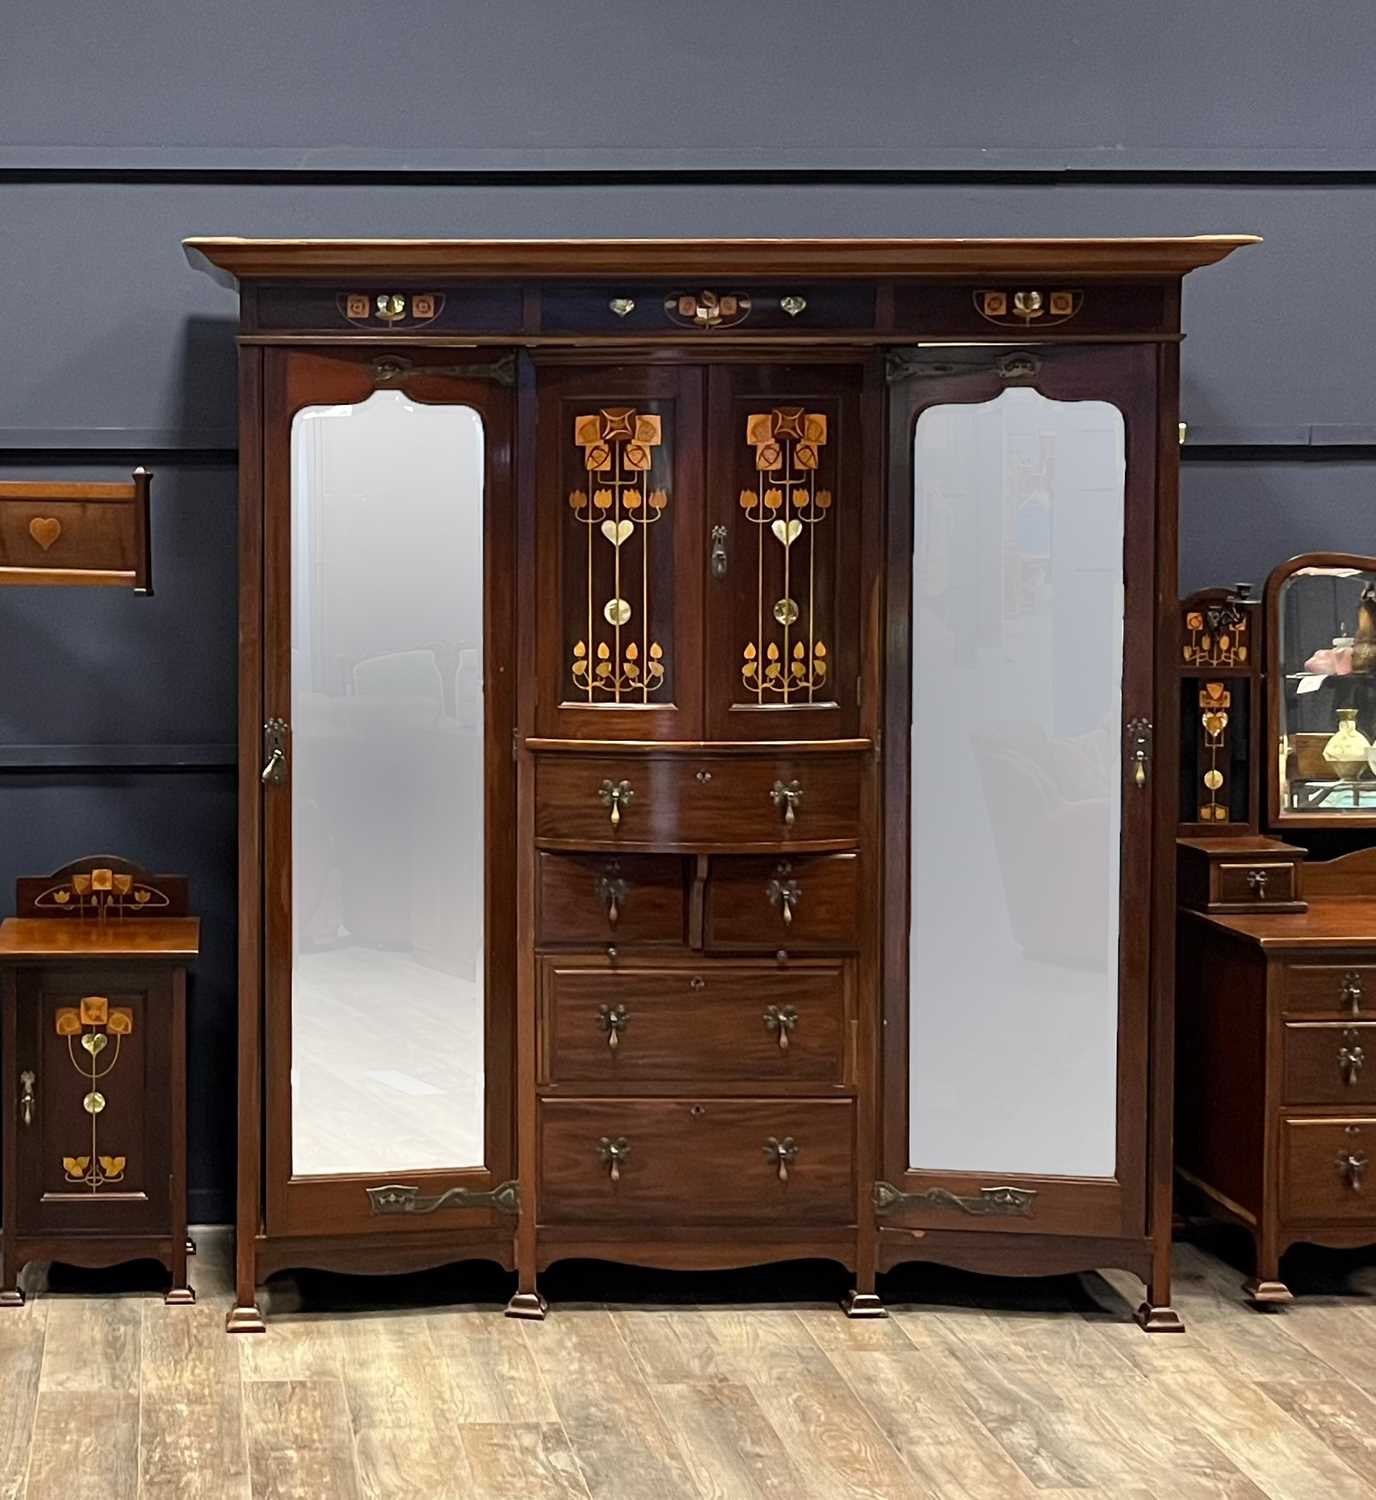 SHAPLAND & PETTER, HANDSOME ART NOUVEAU MAHOGANY AND MARQUETRY BEDROOM SUITE, CIRCA 1900